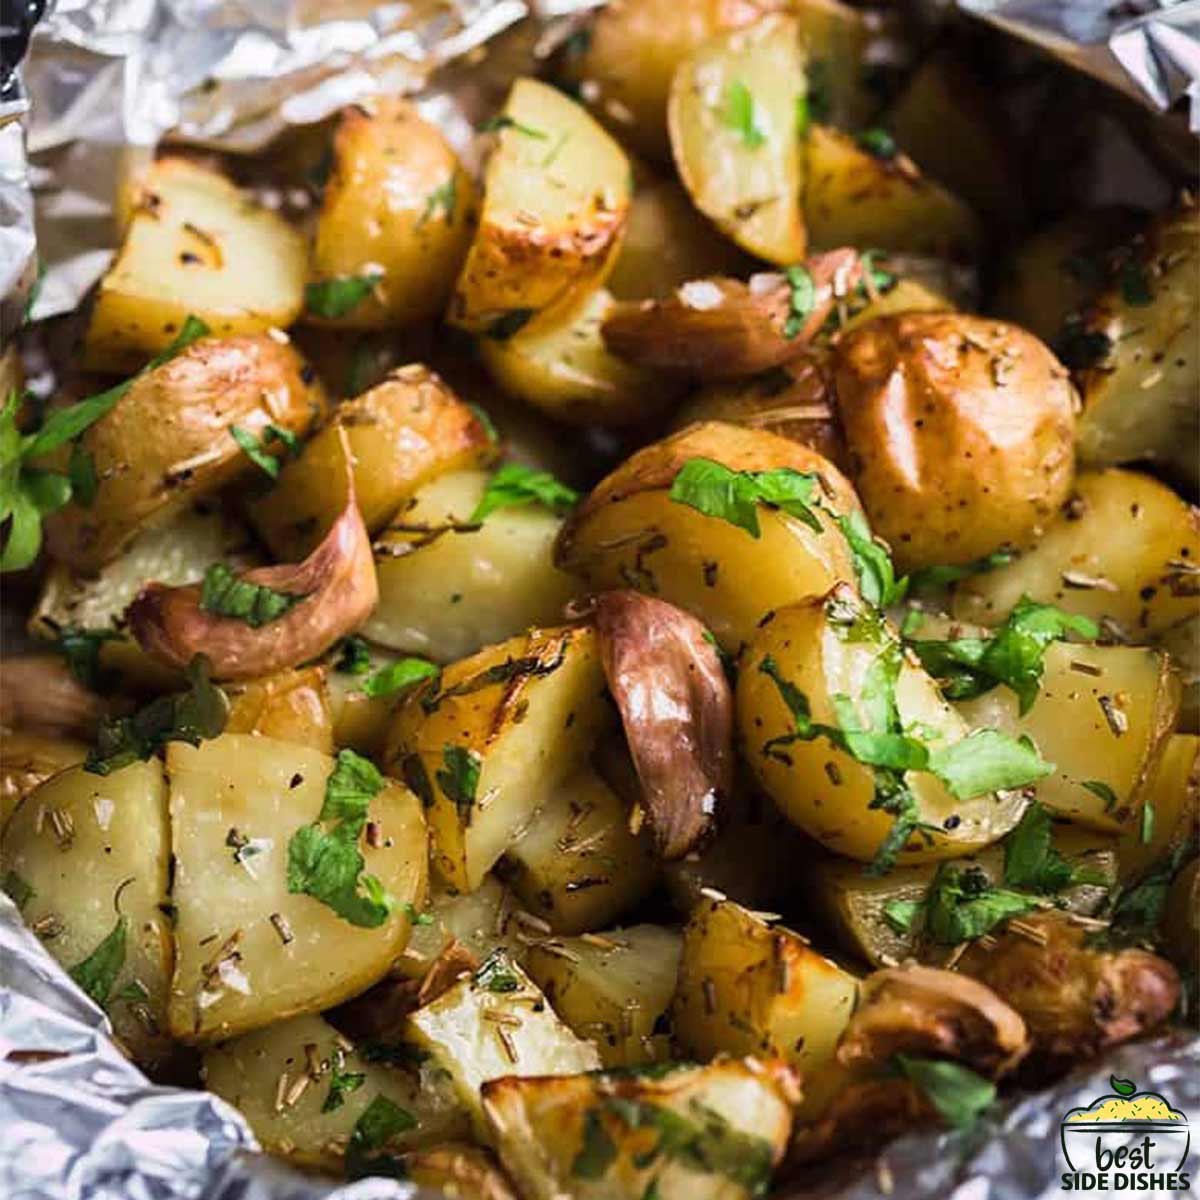 Grilled potatoes with parsley in foil